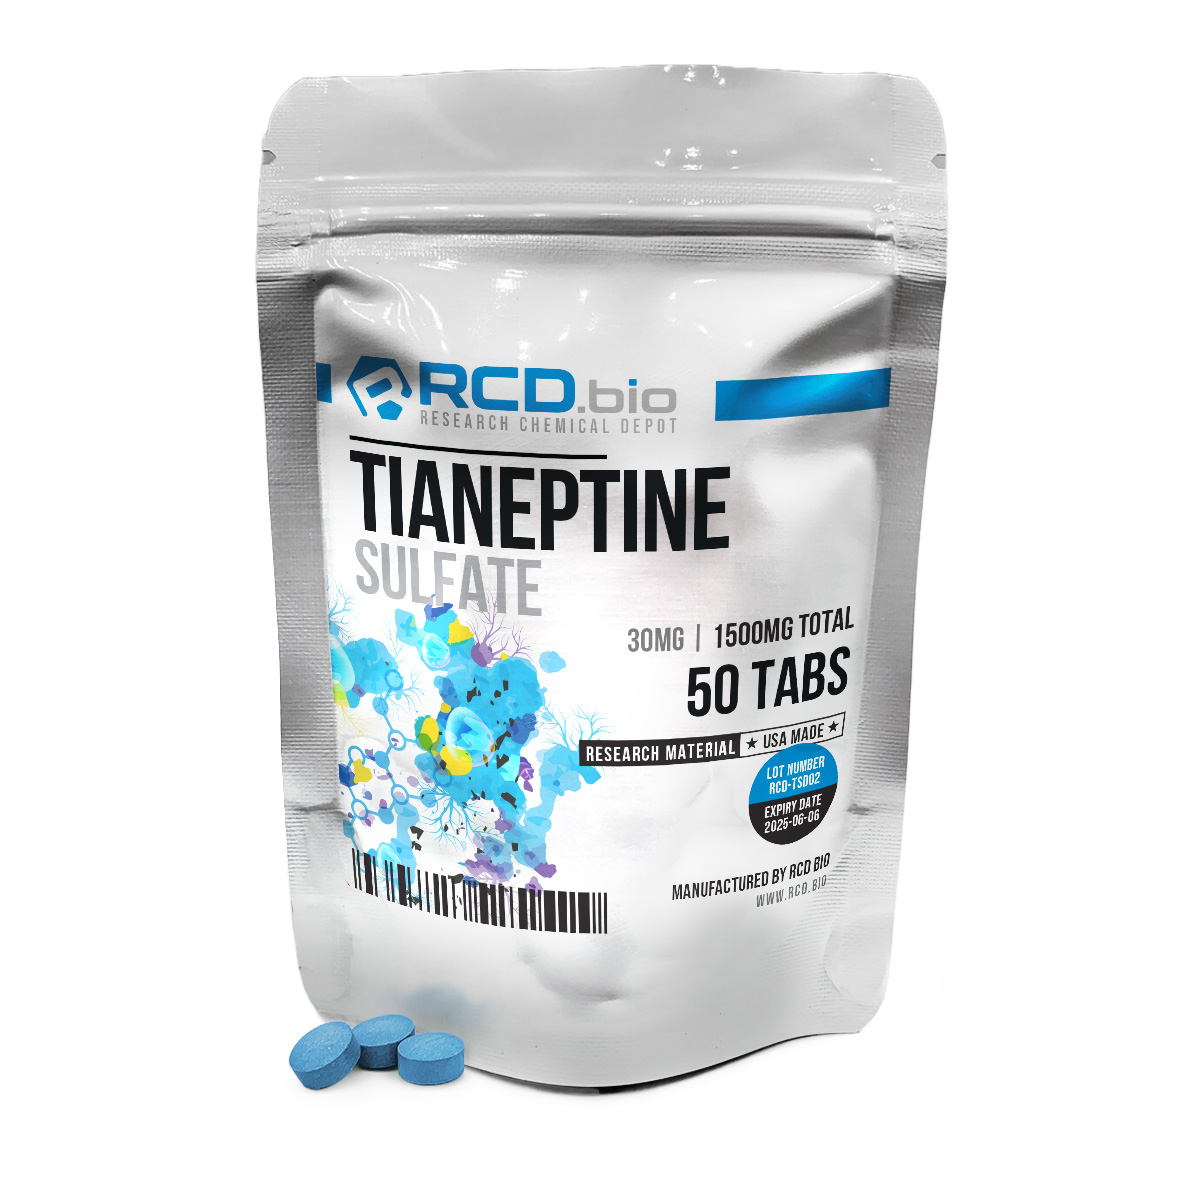 Tianeptine Sulfate Tablet for Sale | Fast Shipping | RCD.bio